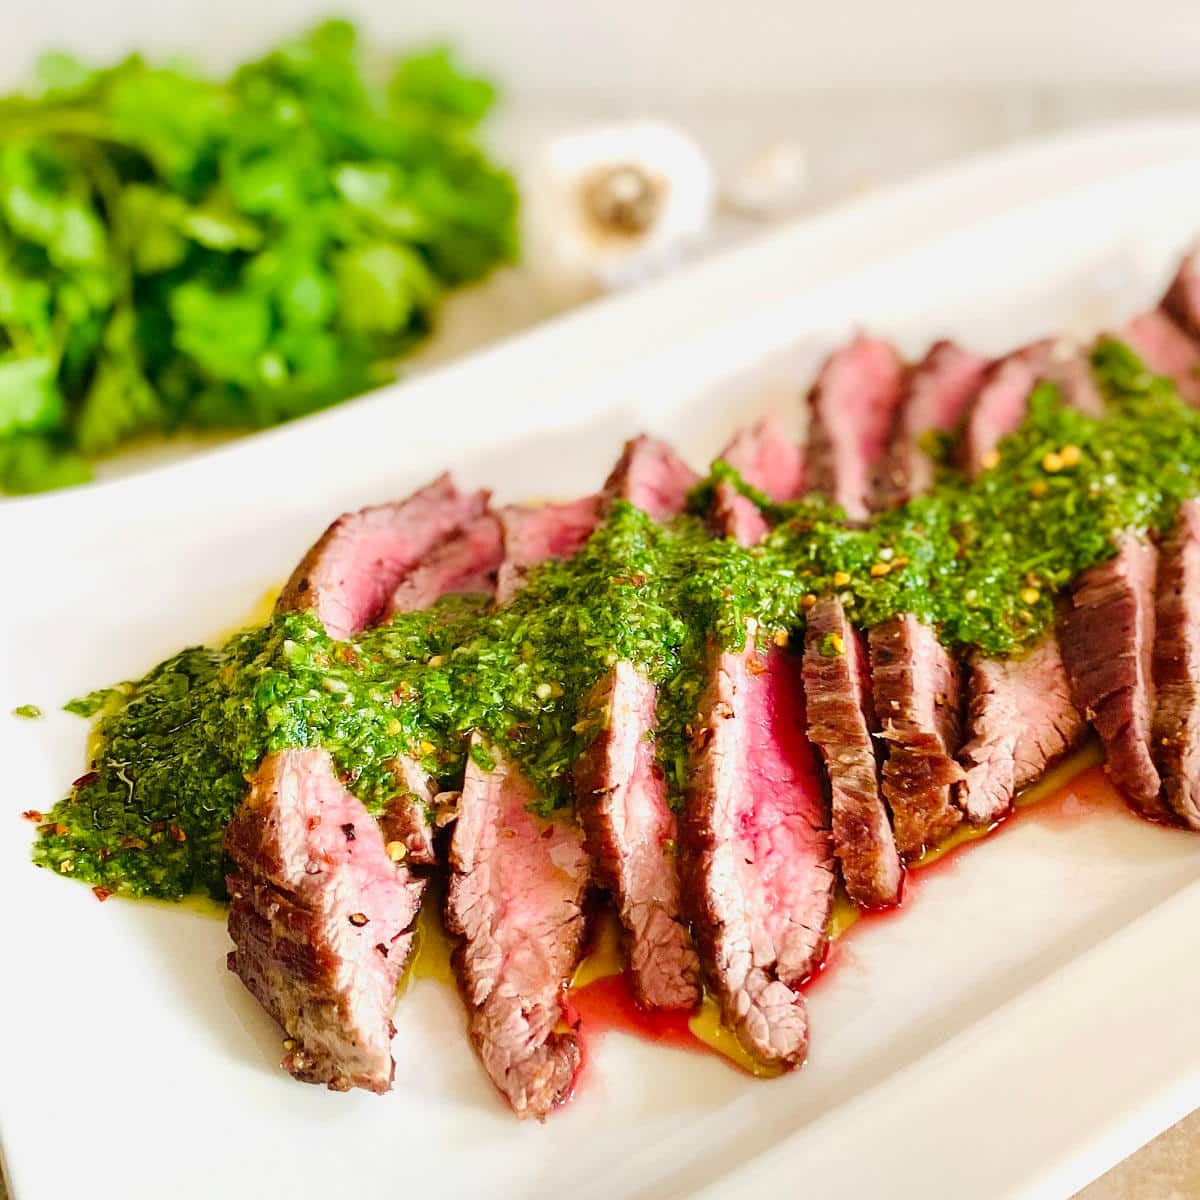 spicy chimichurri sauce over sliced steak with fresh cilantro and garlic in the background